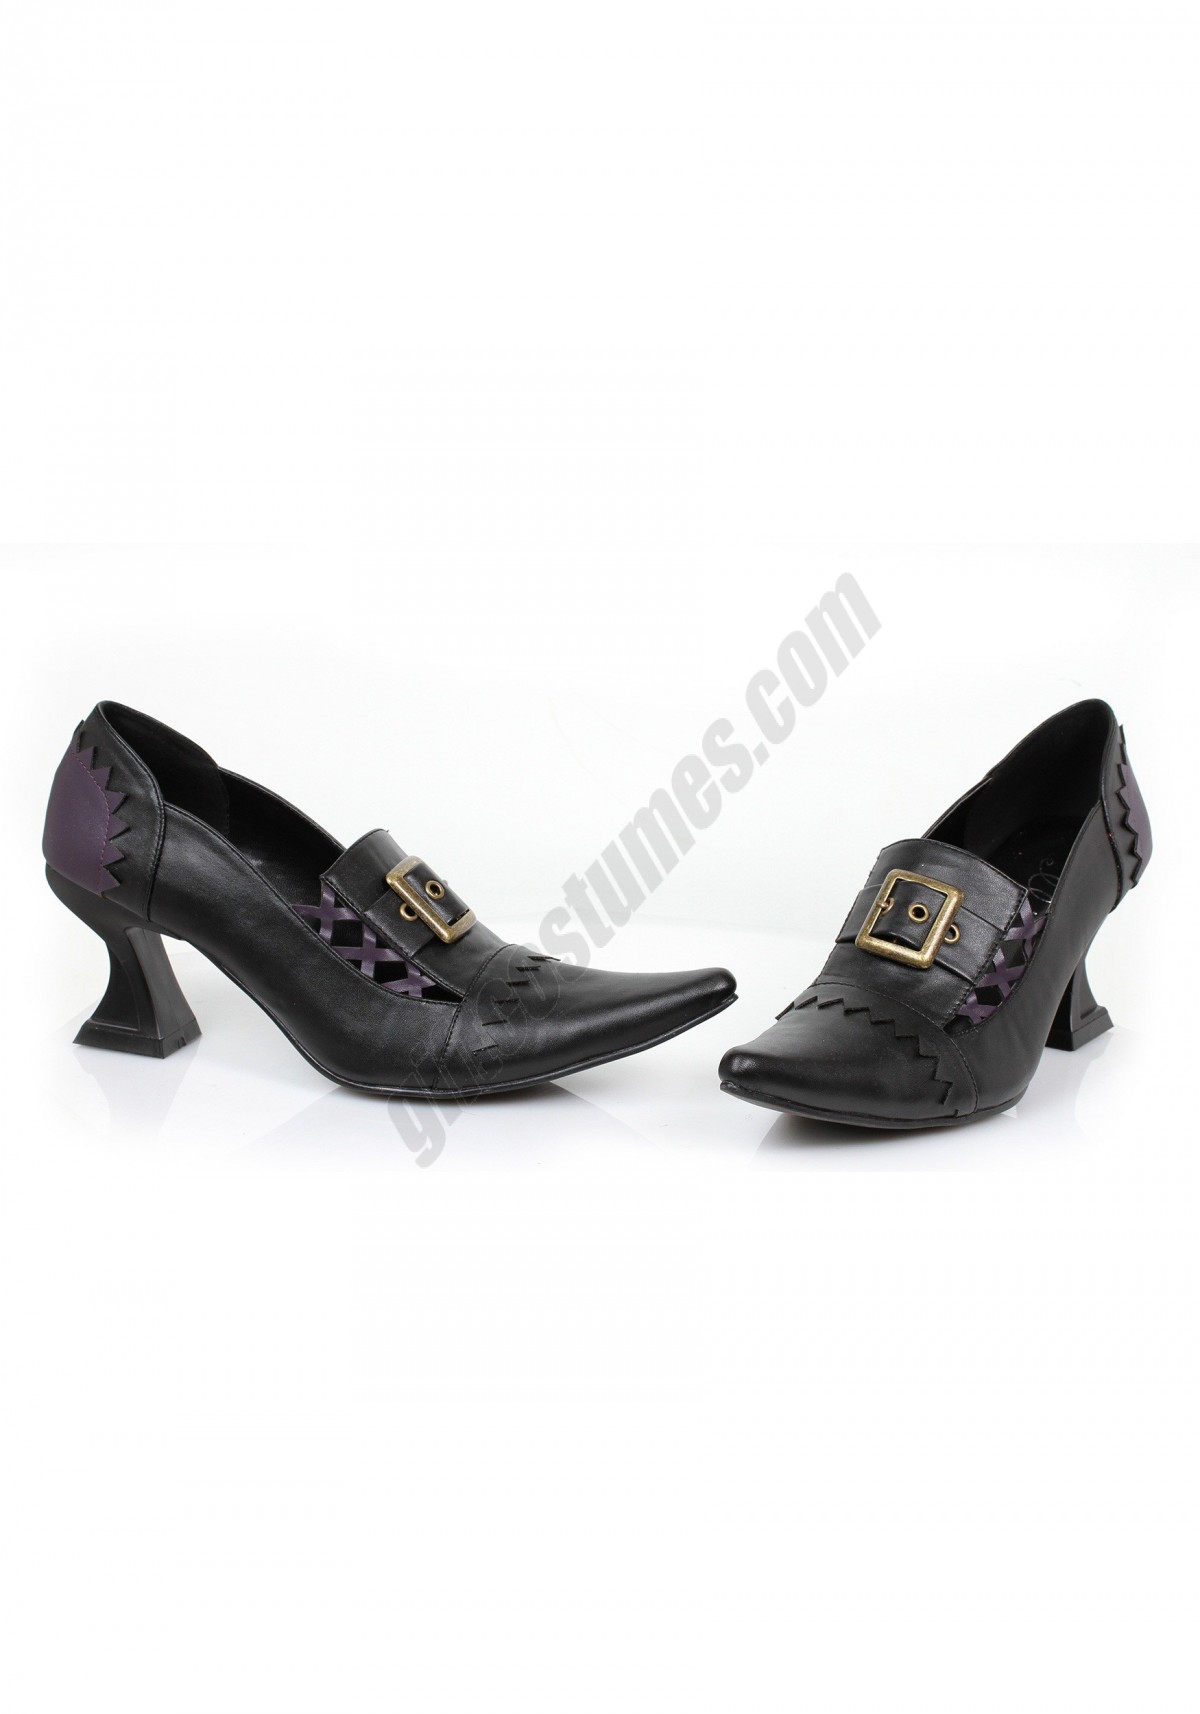 Women's Deluxe Witch Shoes Promotions - -0